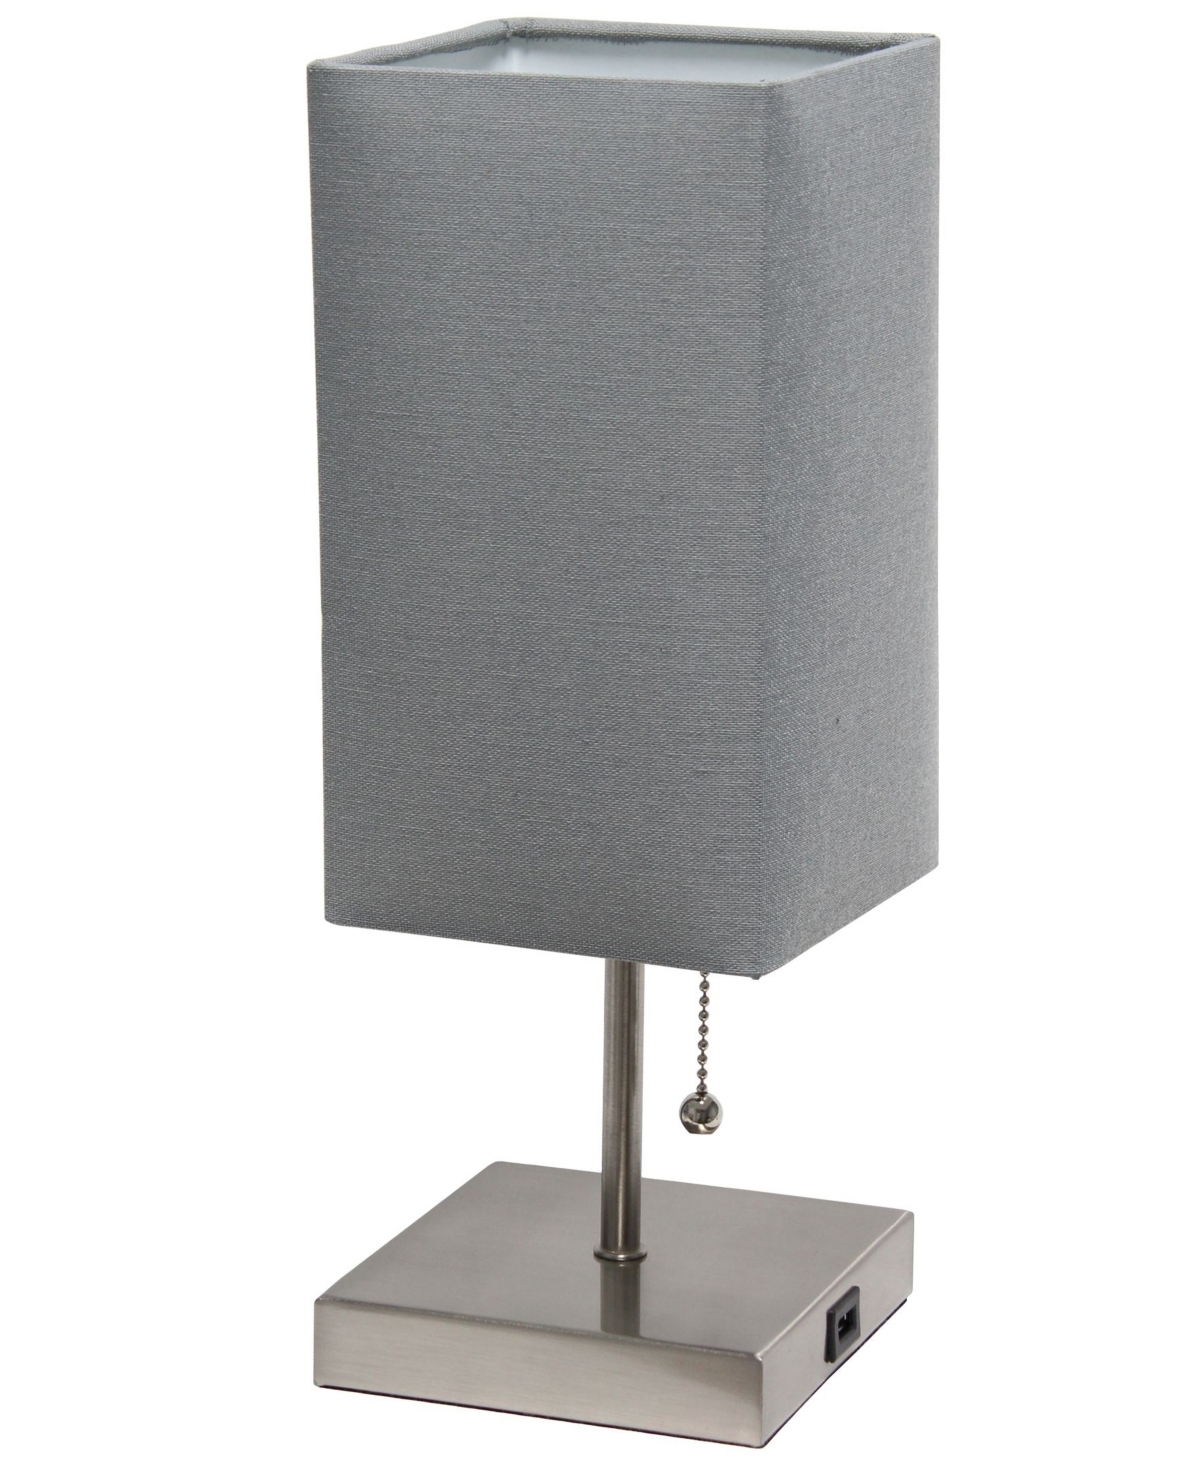 Simple Designs Petite Stick Lamp With Usb Charging Port And Shade In Gray Shade,brushed Nickel Base